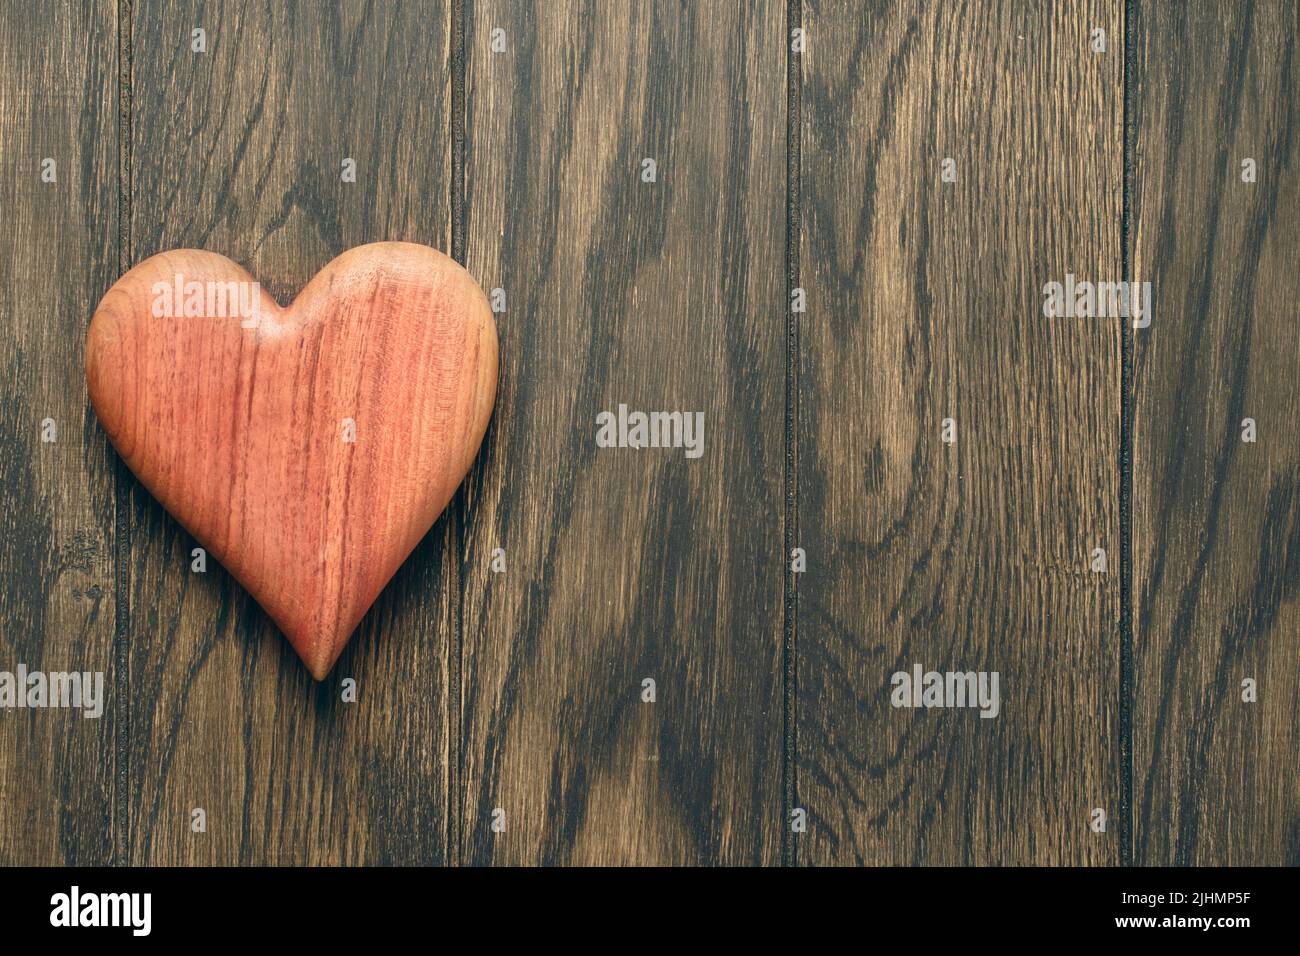 Wooden heart on oak table with copy space Stock Photo